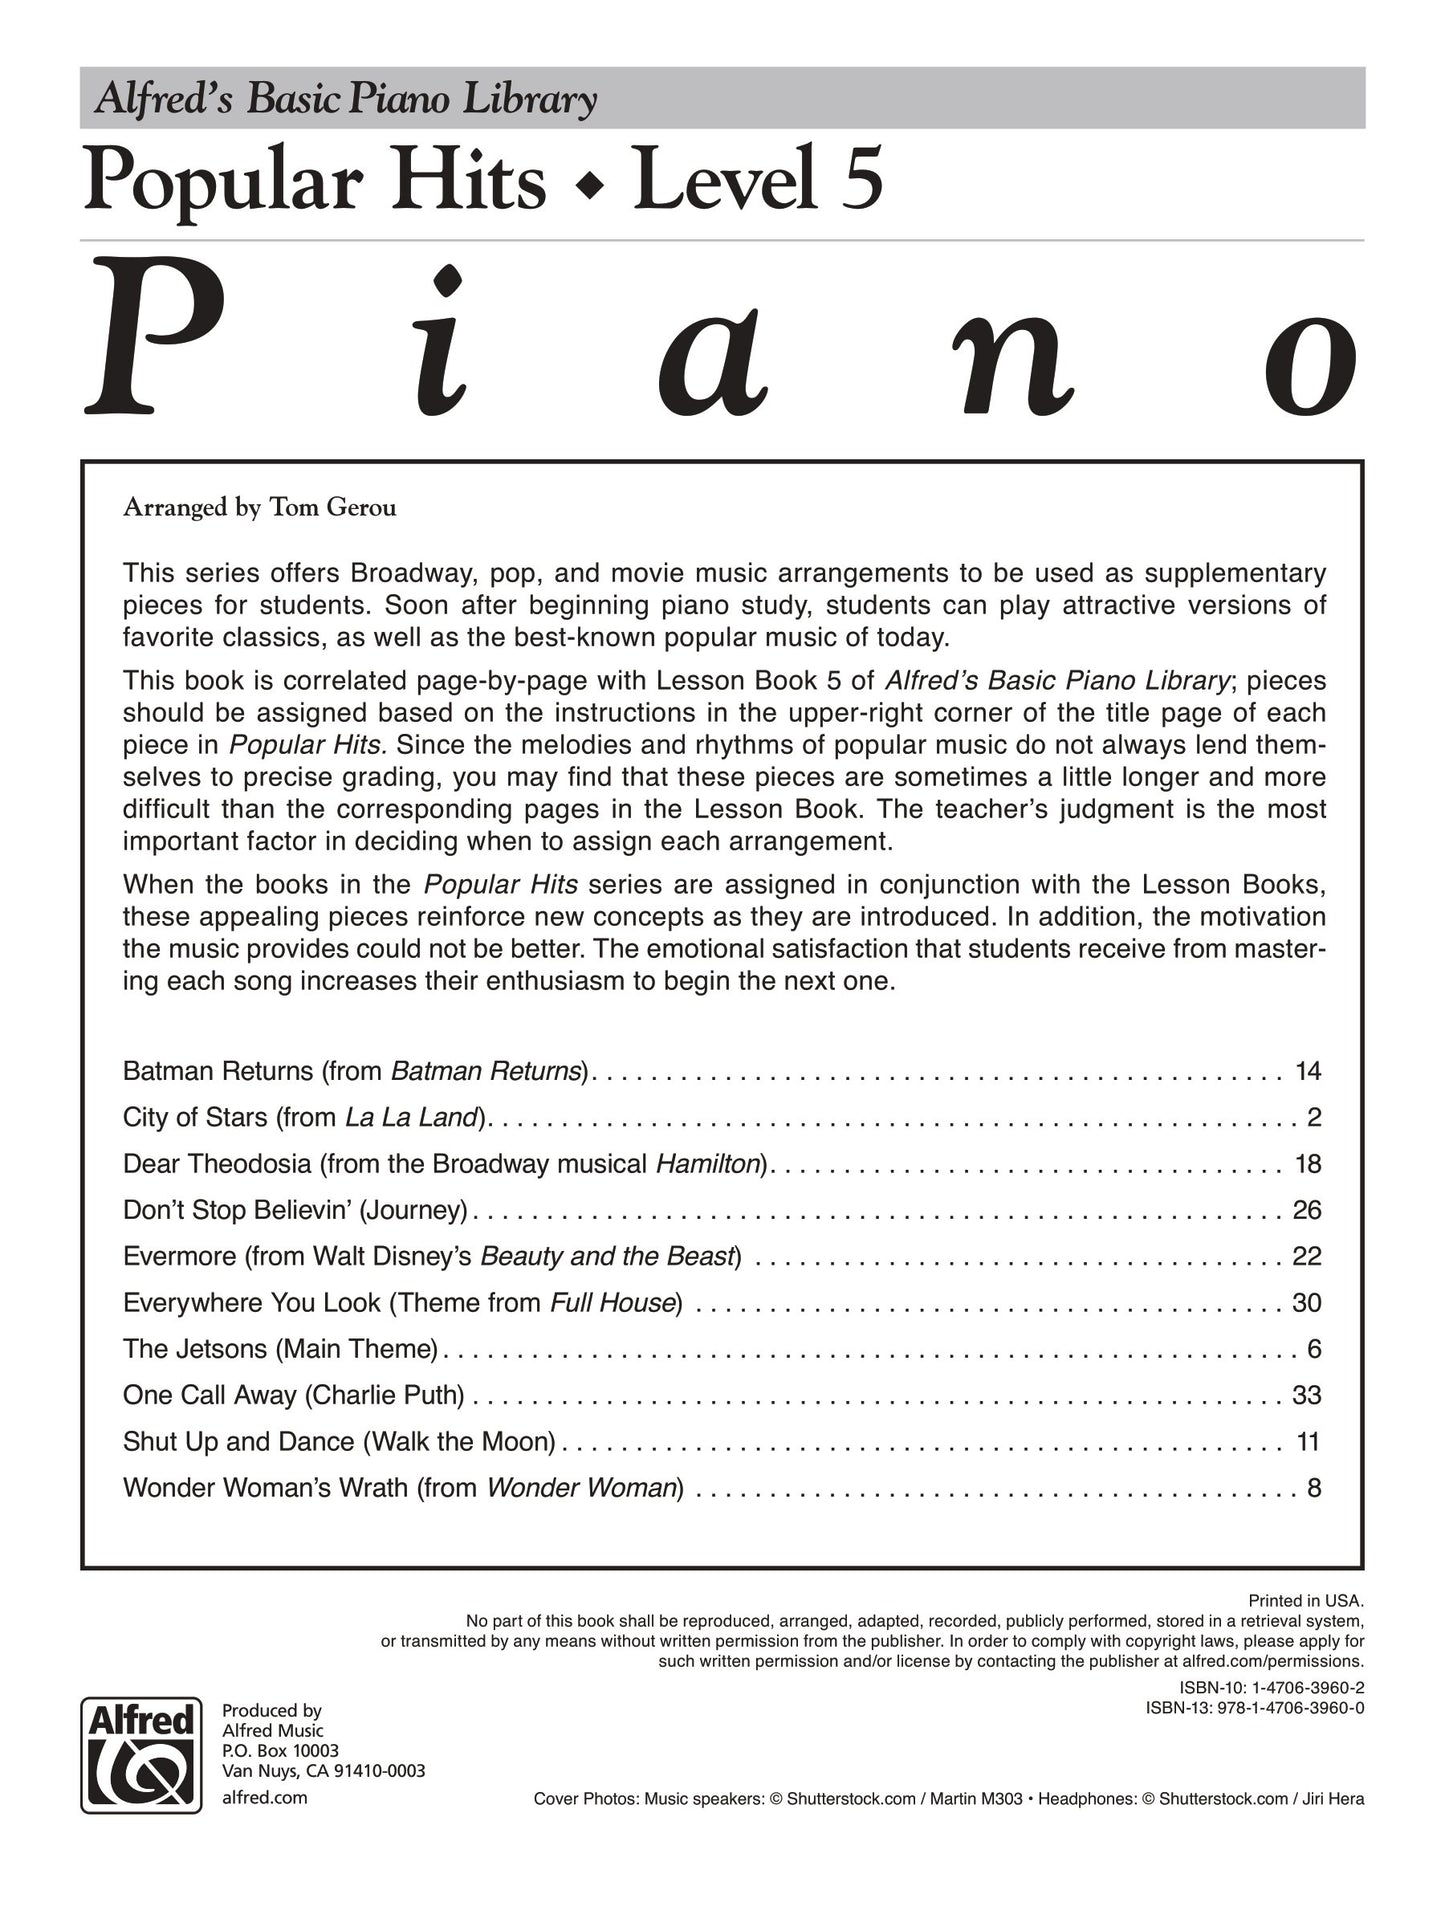 Alfred's Basic Piano Library - Popular Hits Level 5 Book